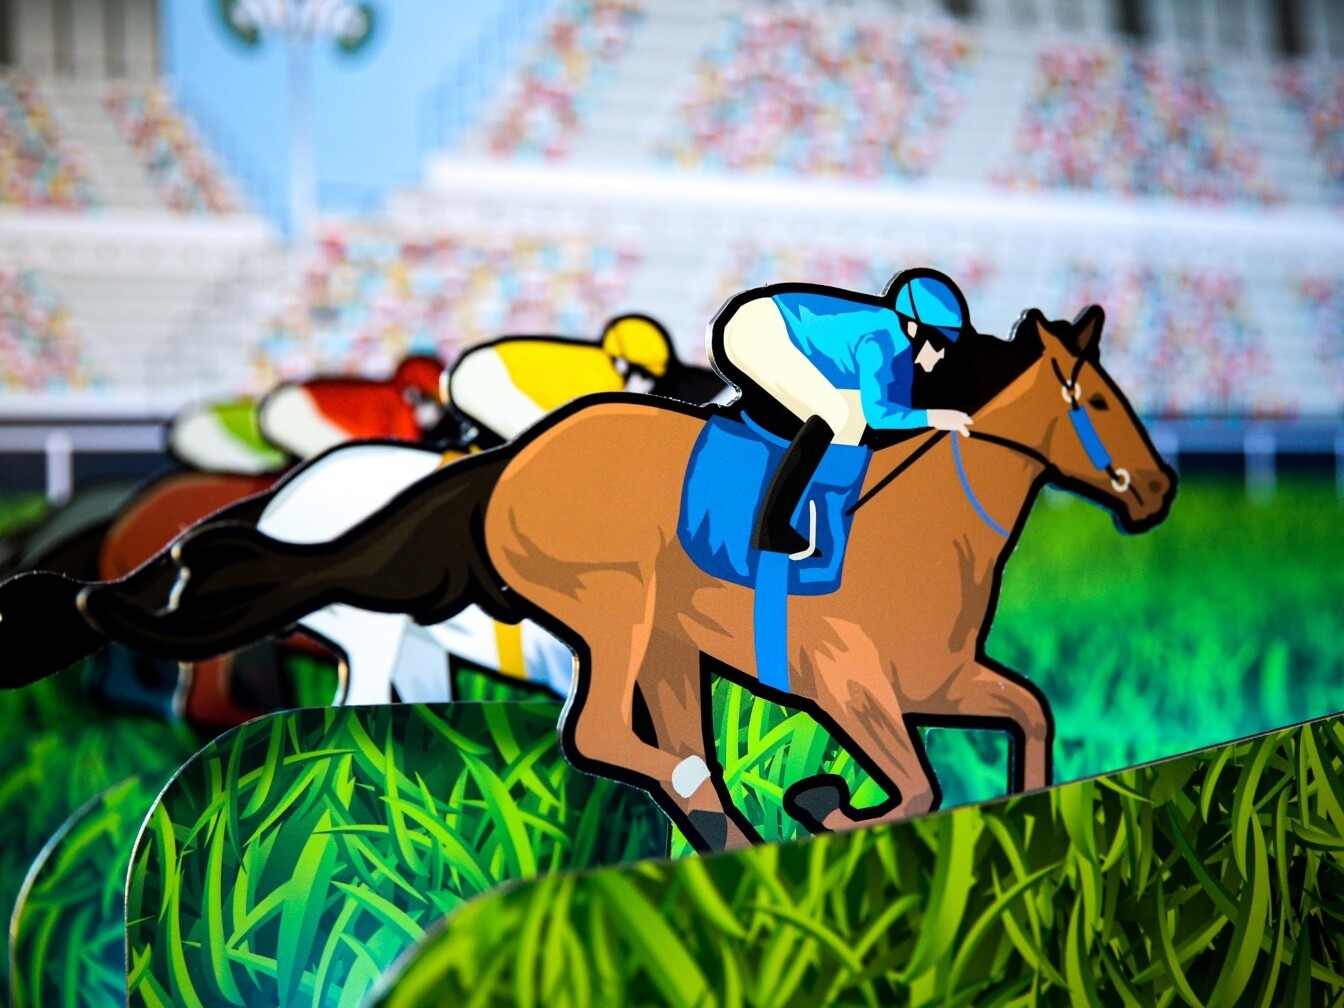 Roll a Ball Derby Horse Racing Game Character Corporate Party Hire London Surrey Woodlands